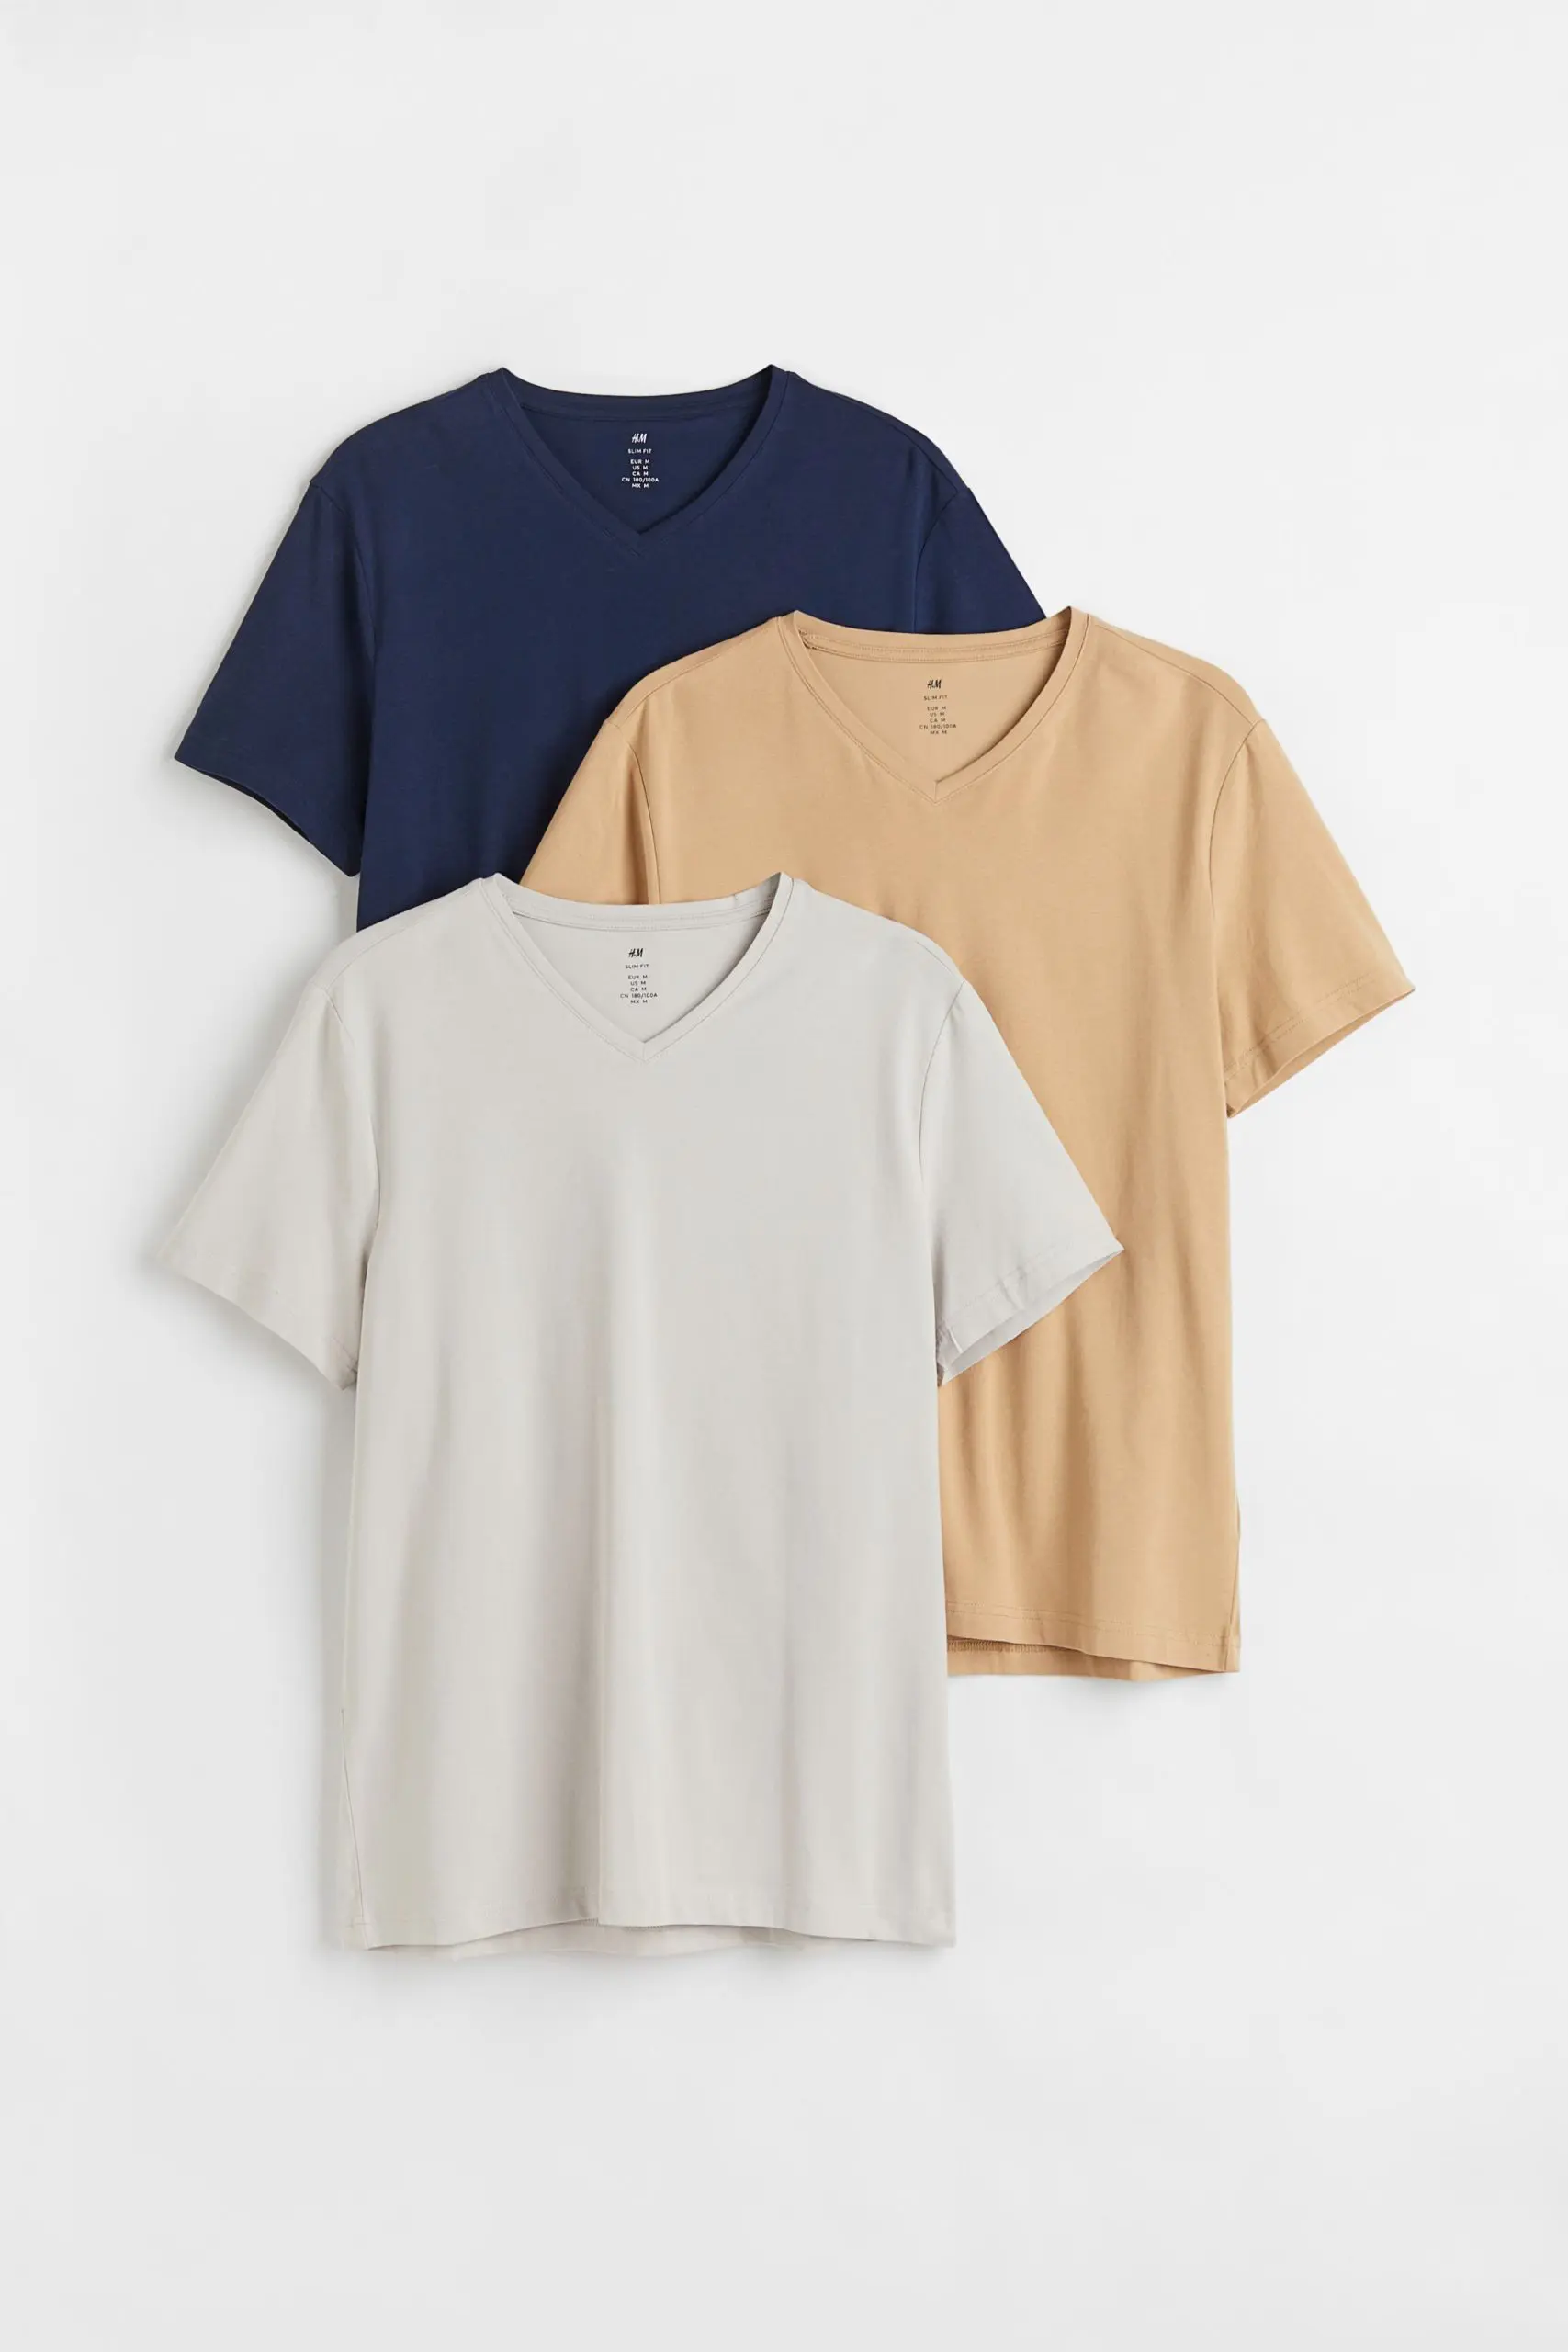 What Is The Ideal Depth Of A V Neck?